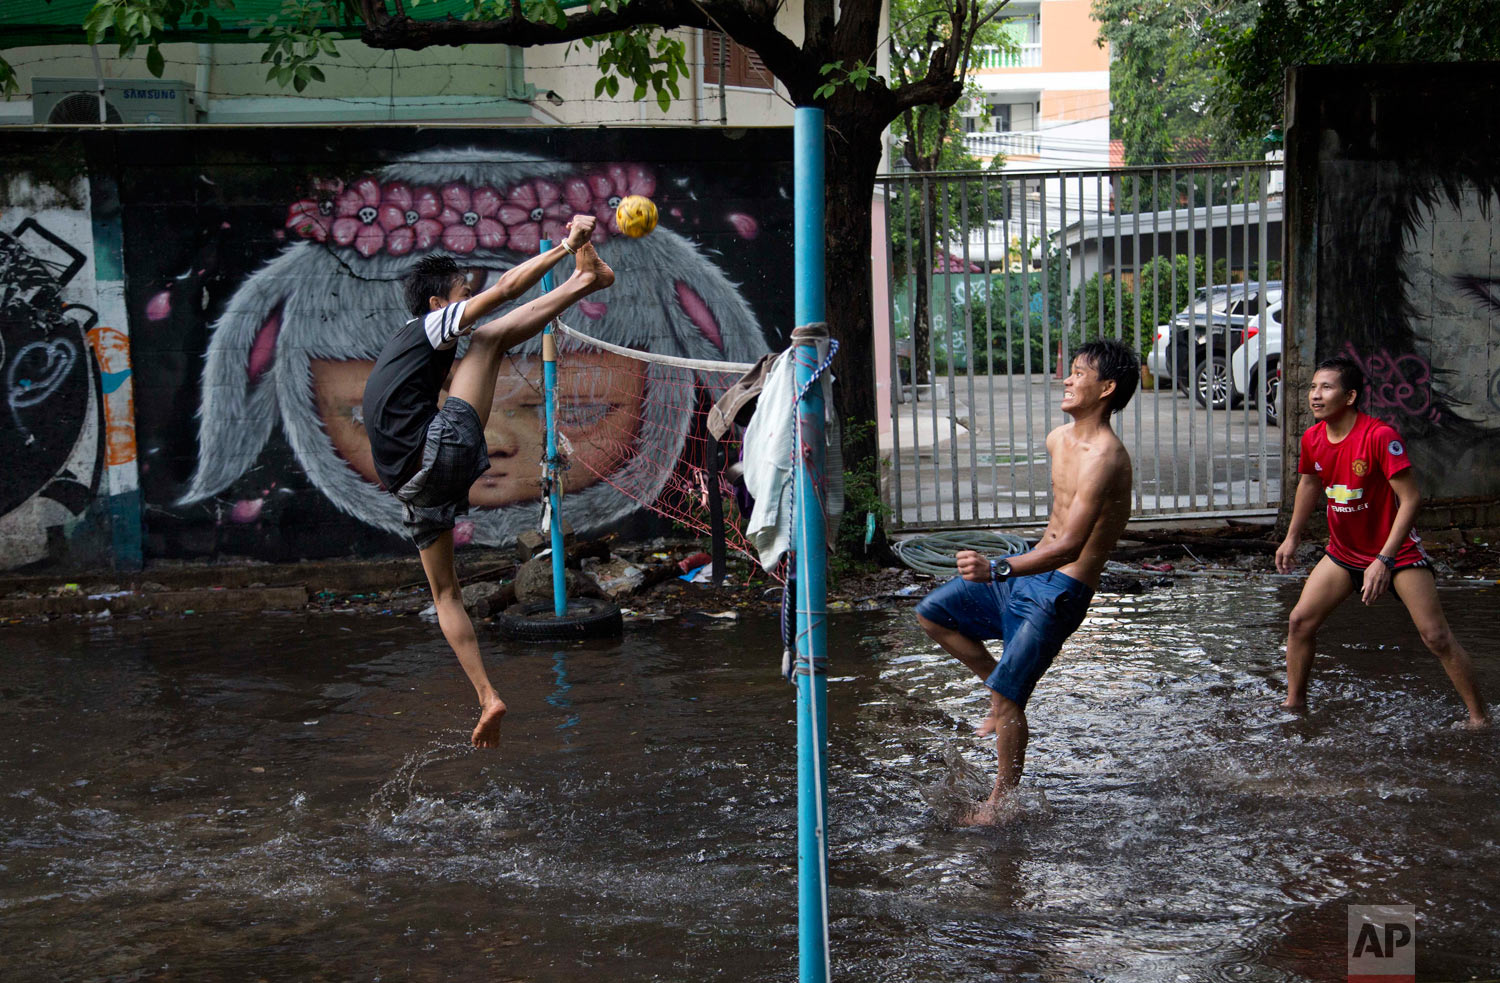  An airborne migrant worker kicks a rattan ball during a game of Chinlone in a field flooded by rain water in Bangkok, Thailand, Thursday, May 31, 2018. The popular Burmese sport Chinlone, a combination of sport and dance, is played between two teams consisting of six players each, passing a rattan ball back and forth with feet, knees and heads. (AP Photo/Gemunu Amarasinghe) 